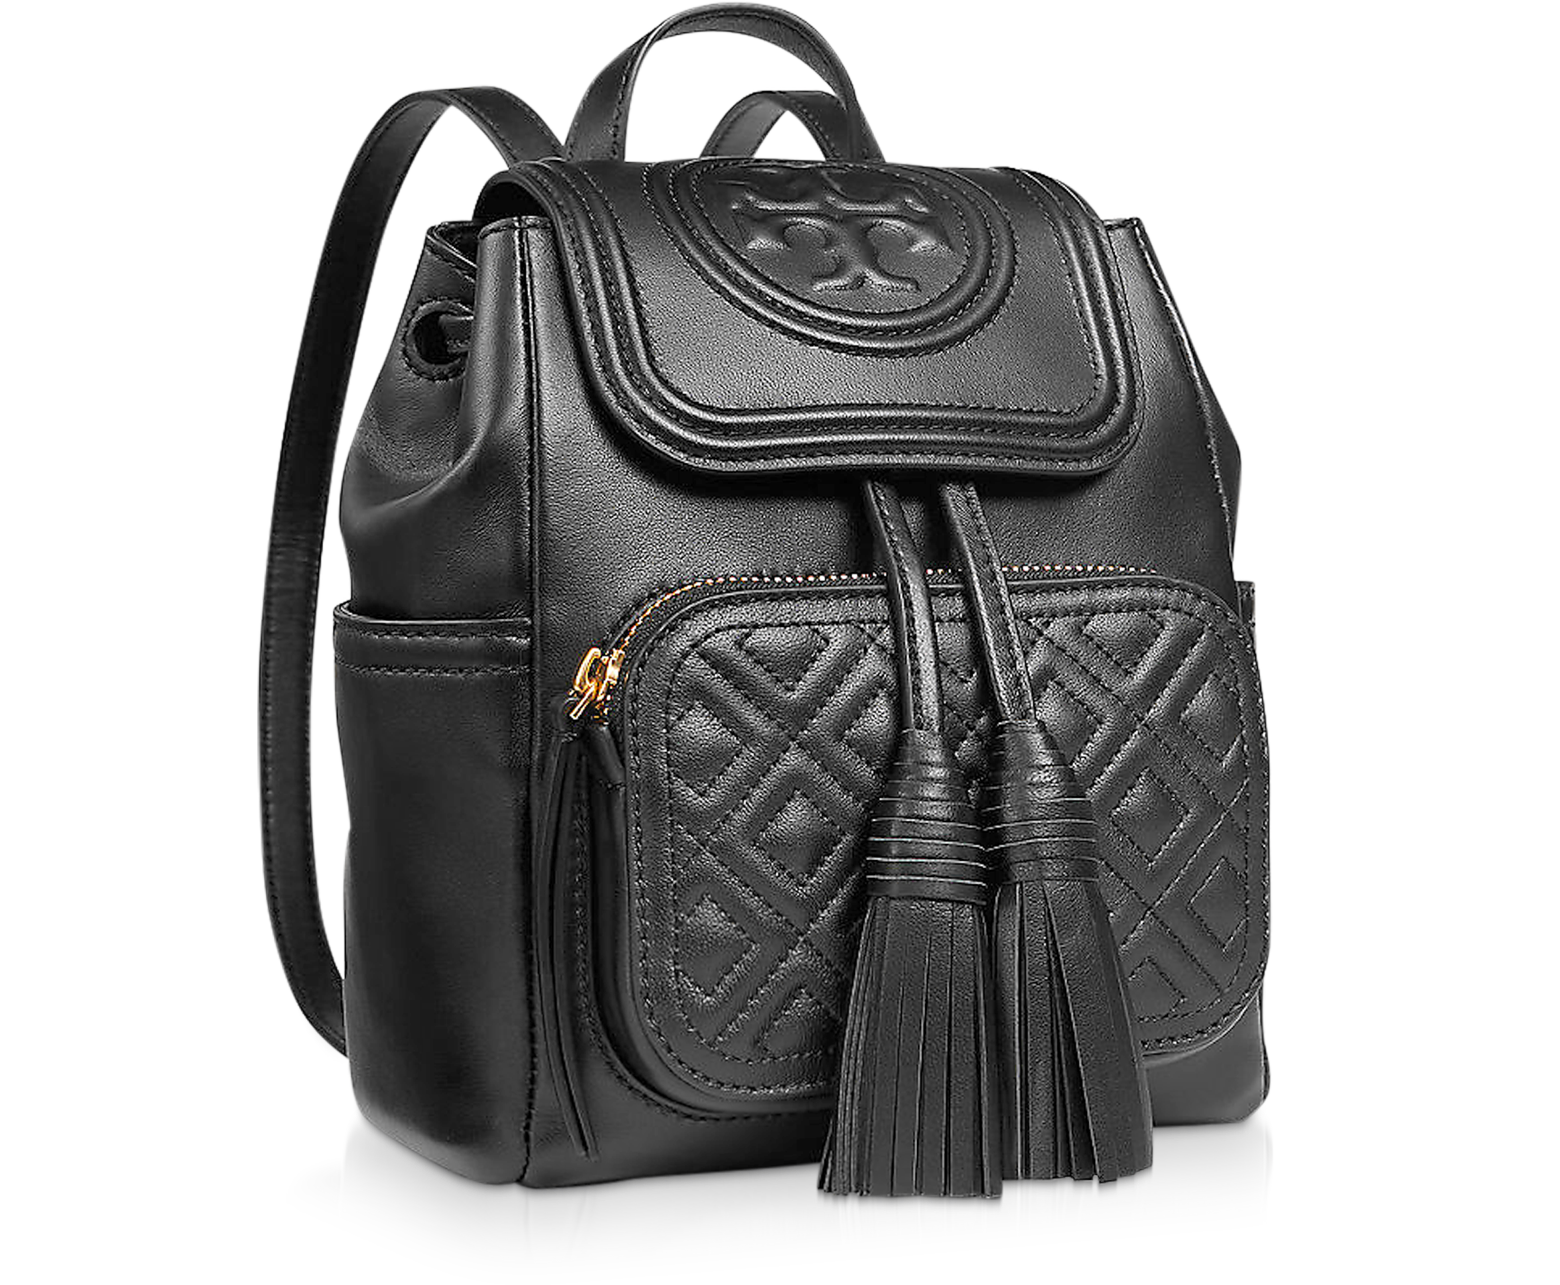 Tory Burch Fleming Large Quilted Indigo Backpack Bag, $450